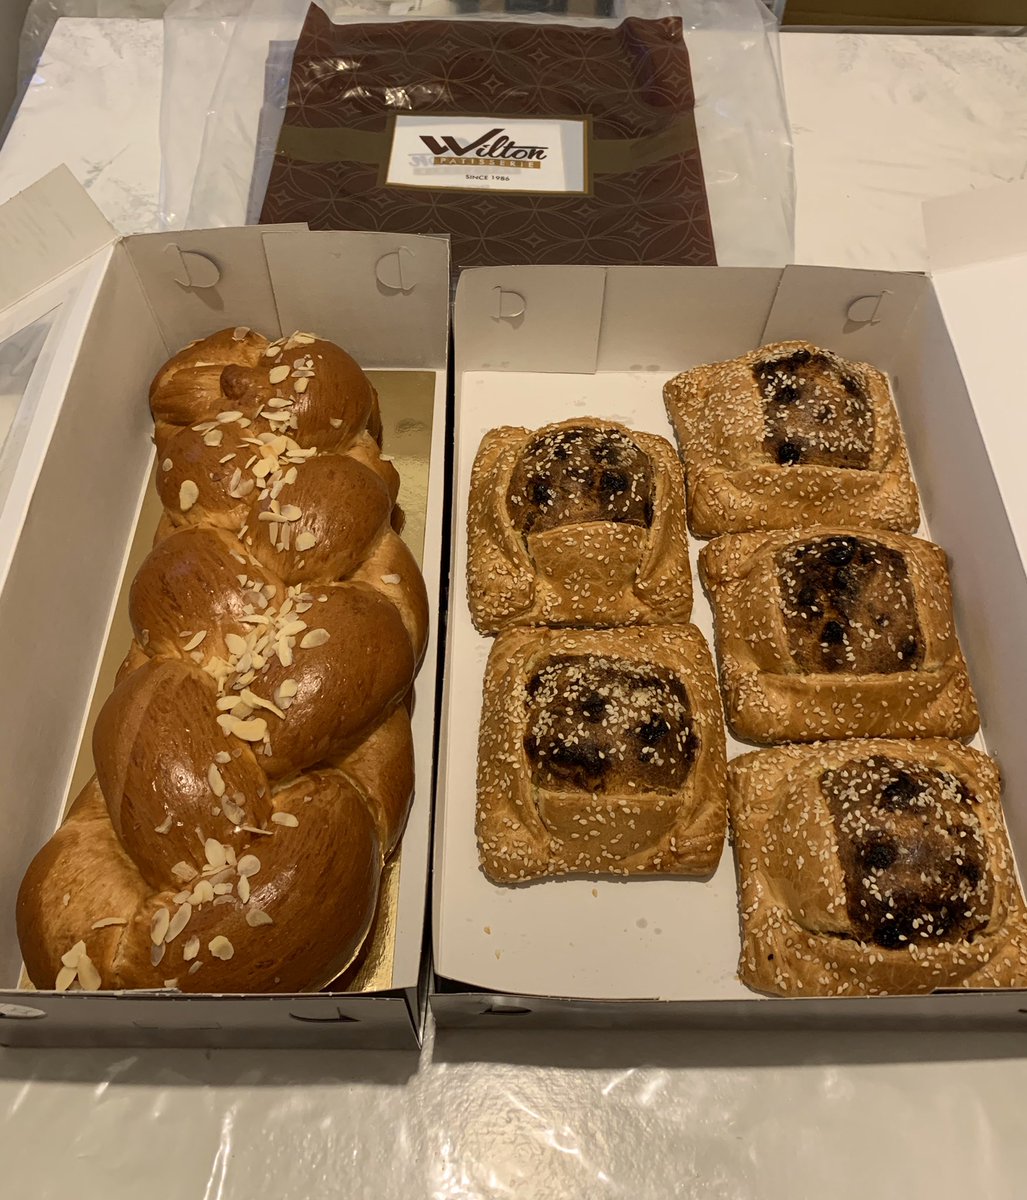 Happy #GreekEaster🙏 We’re celebrating #greekeaster today with this #traditional #sweet #bread #tsoureki & #greek #easter #cheese #pies #flaounes 😋These #delicious #greek #easter treats are from @wiltonuk_ 👍 
#greekorthodox #orthodoxeaster #easter #greekflavours #crouchend